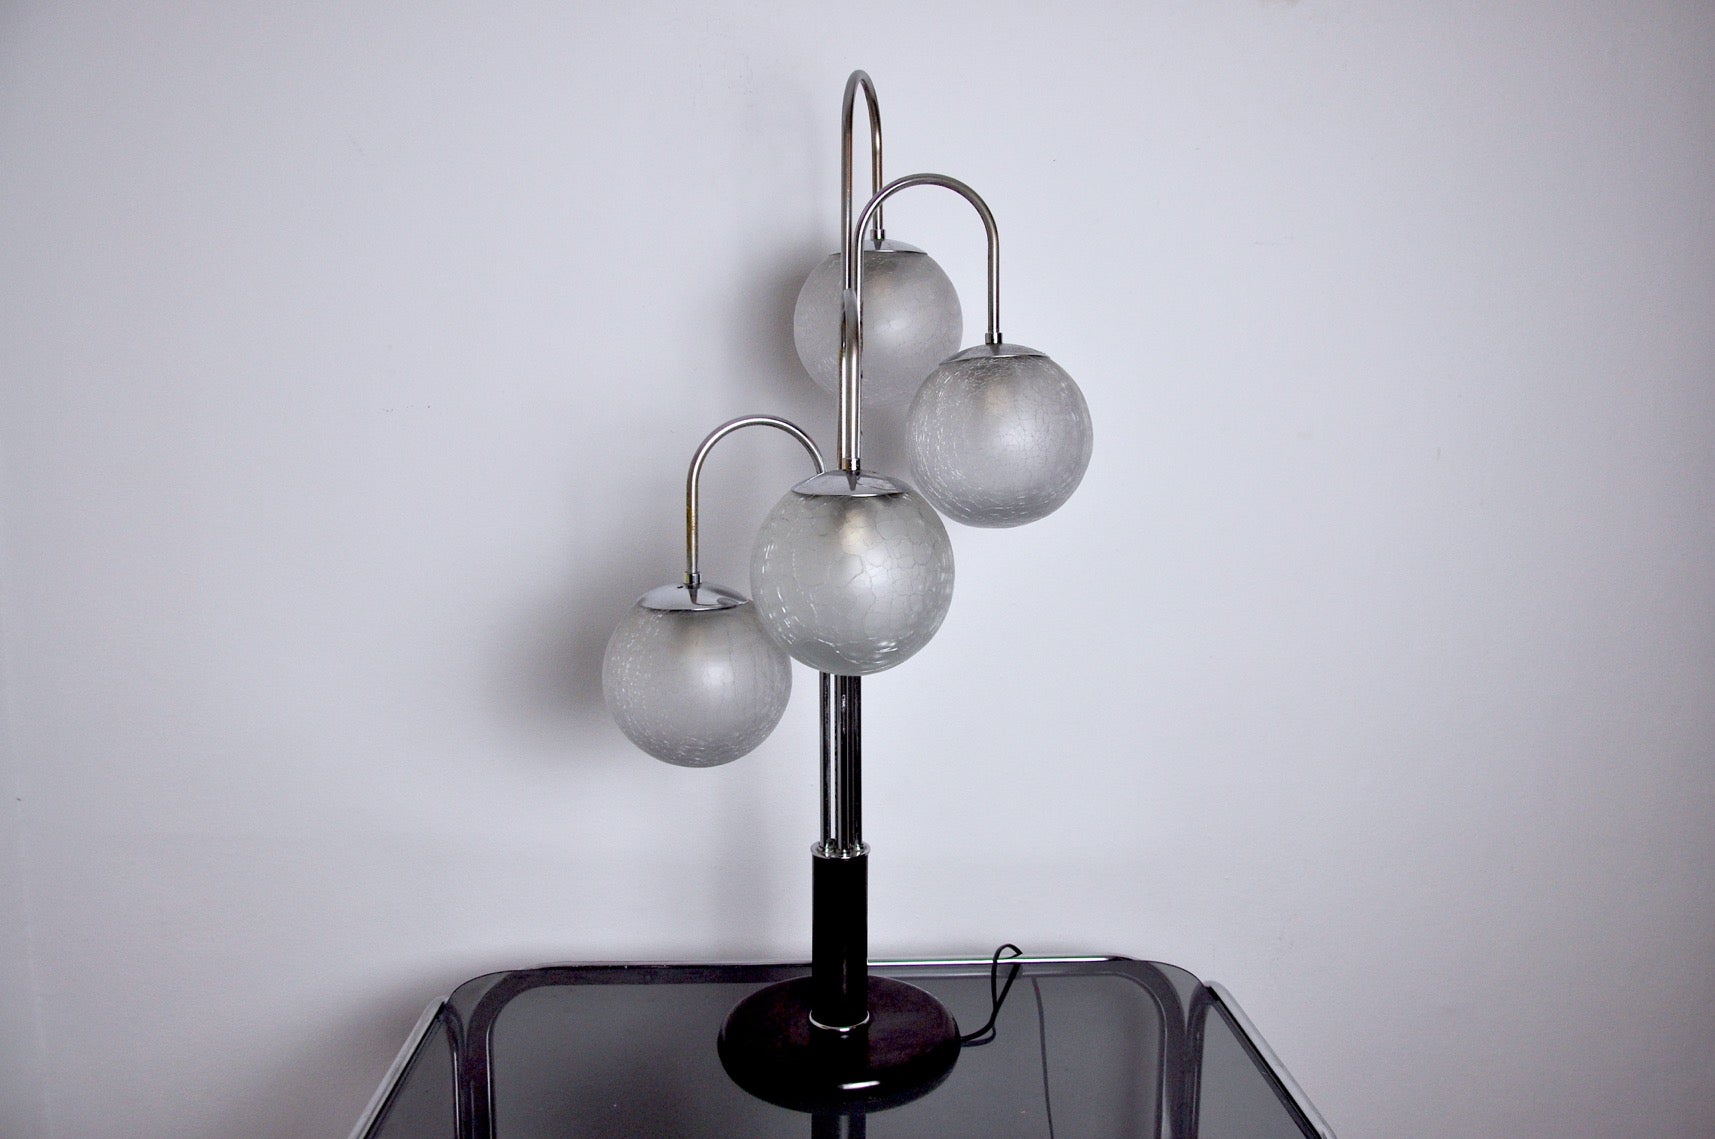 Superb Art Deco lamp with its frosted murano glass globes dating from the 60s. 4 spiral points of light which give a unique effect to this lamp. Due to its size, it can also be used as a table lamp or floor lamp in an interior. Marks of time